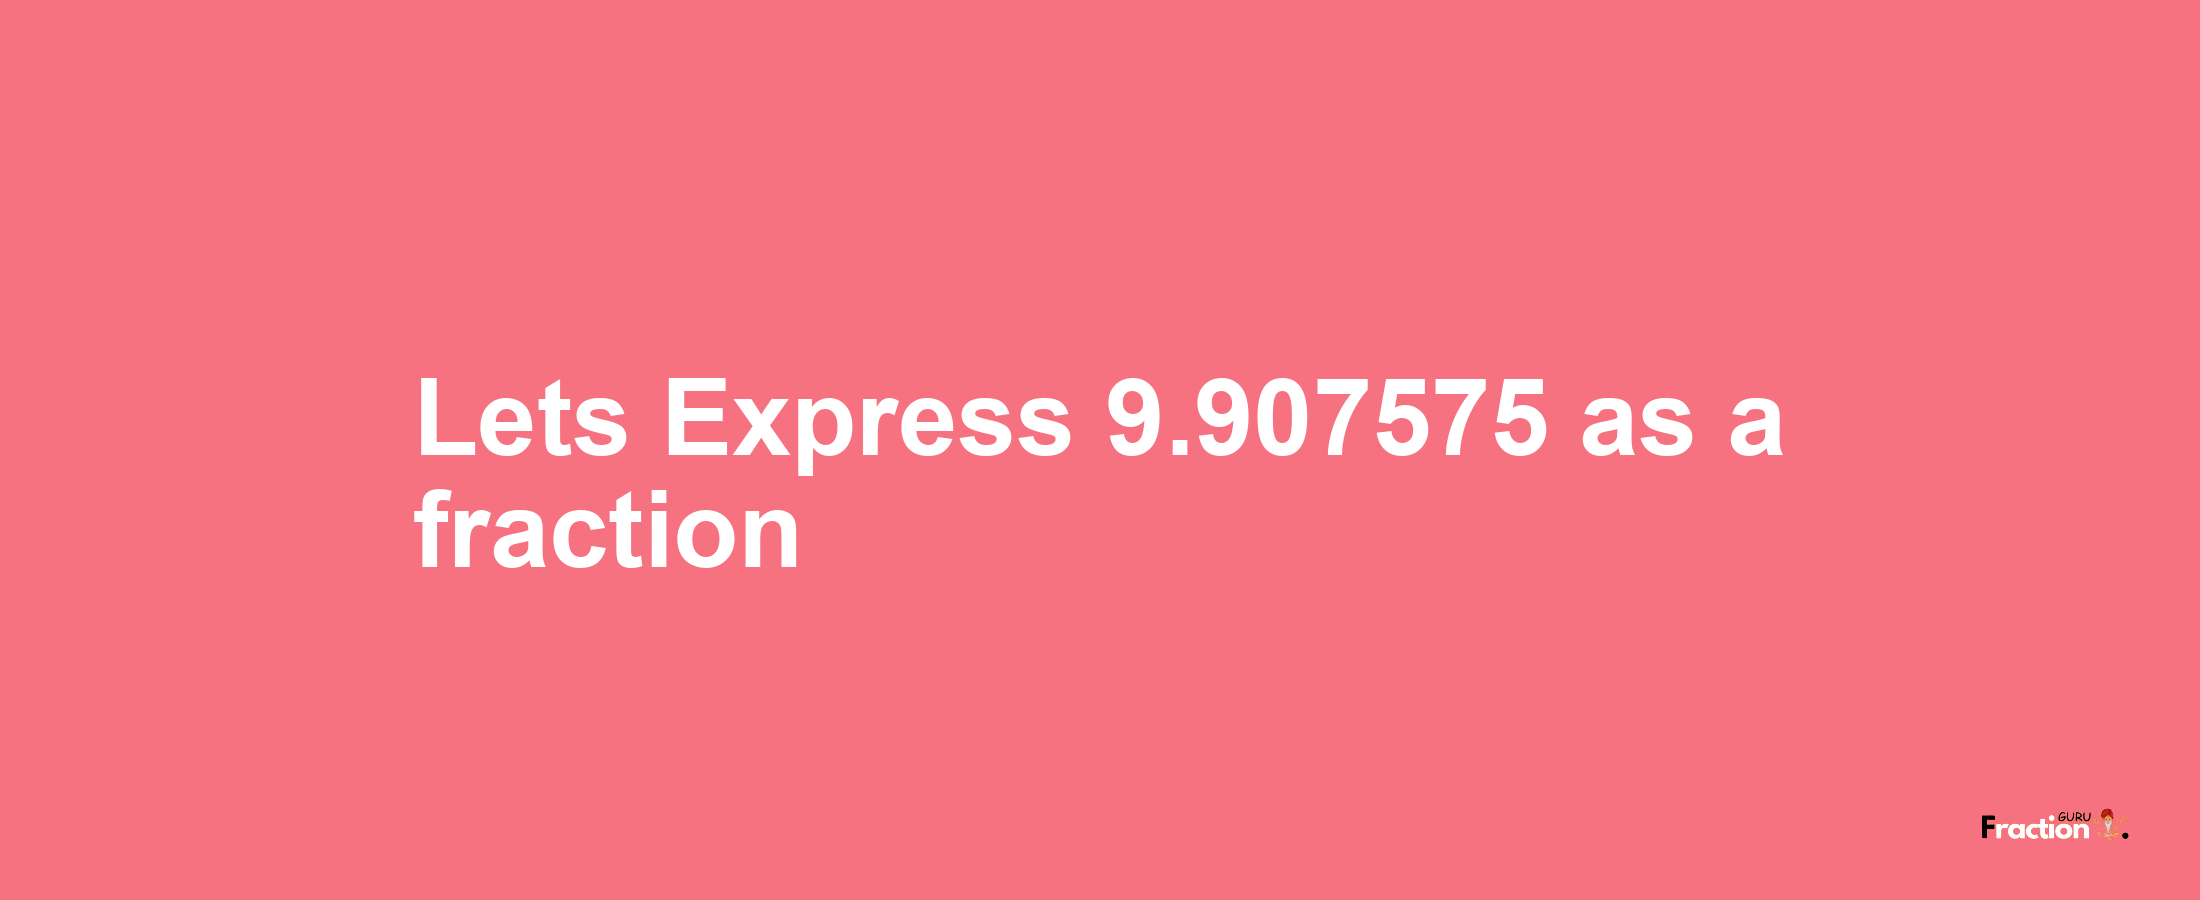 Lets Express 9.907575 as afraction